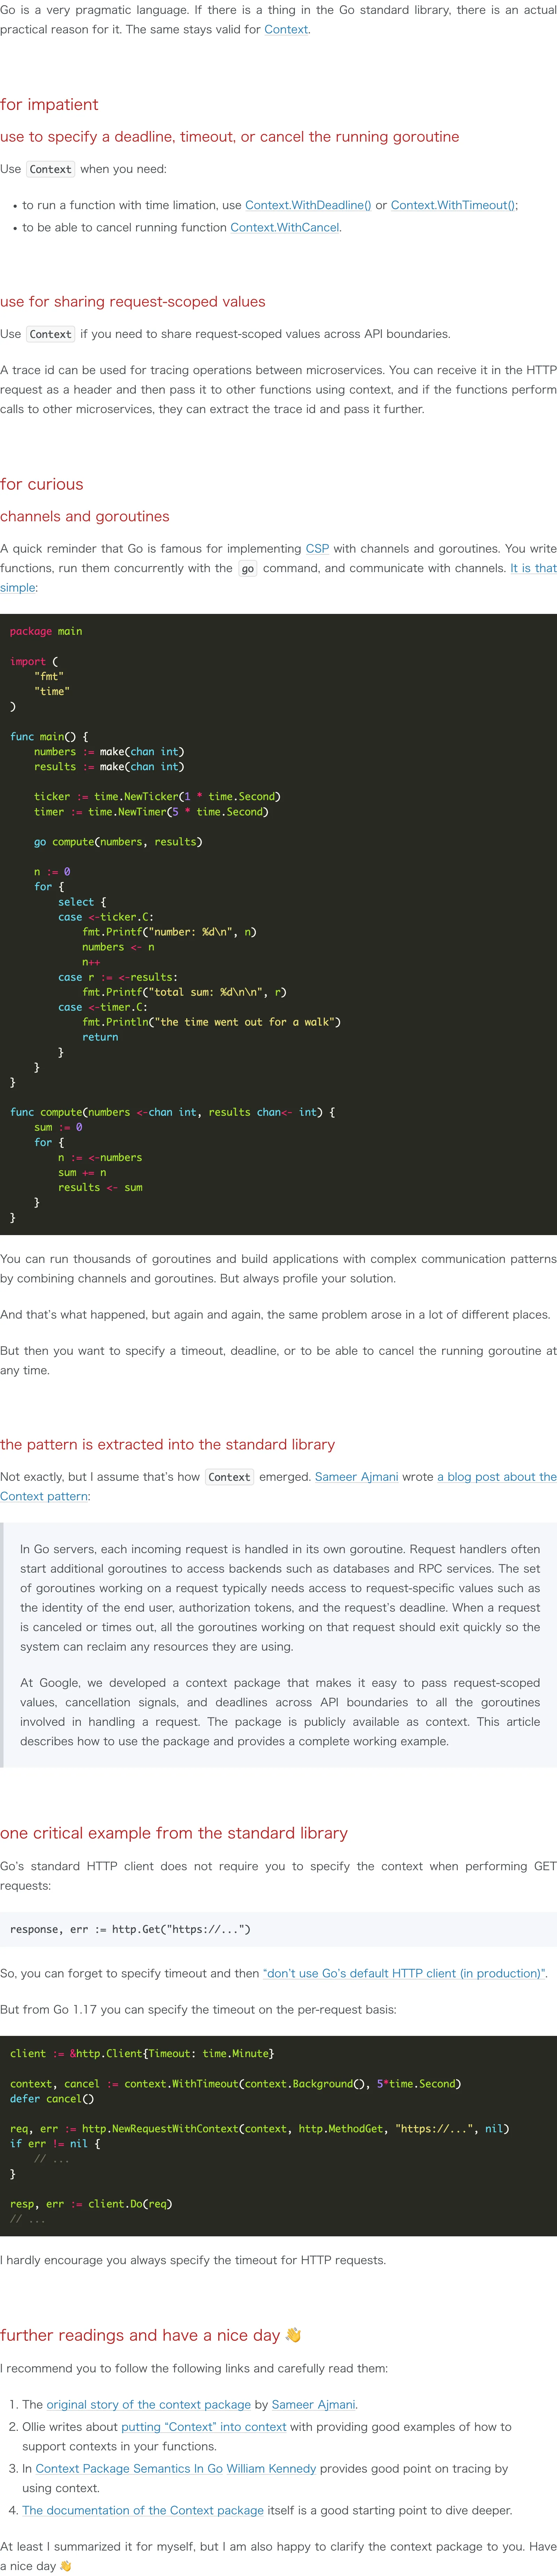 A screenshot of the content part of the Scalable Developer site taken by
screenshot API